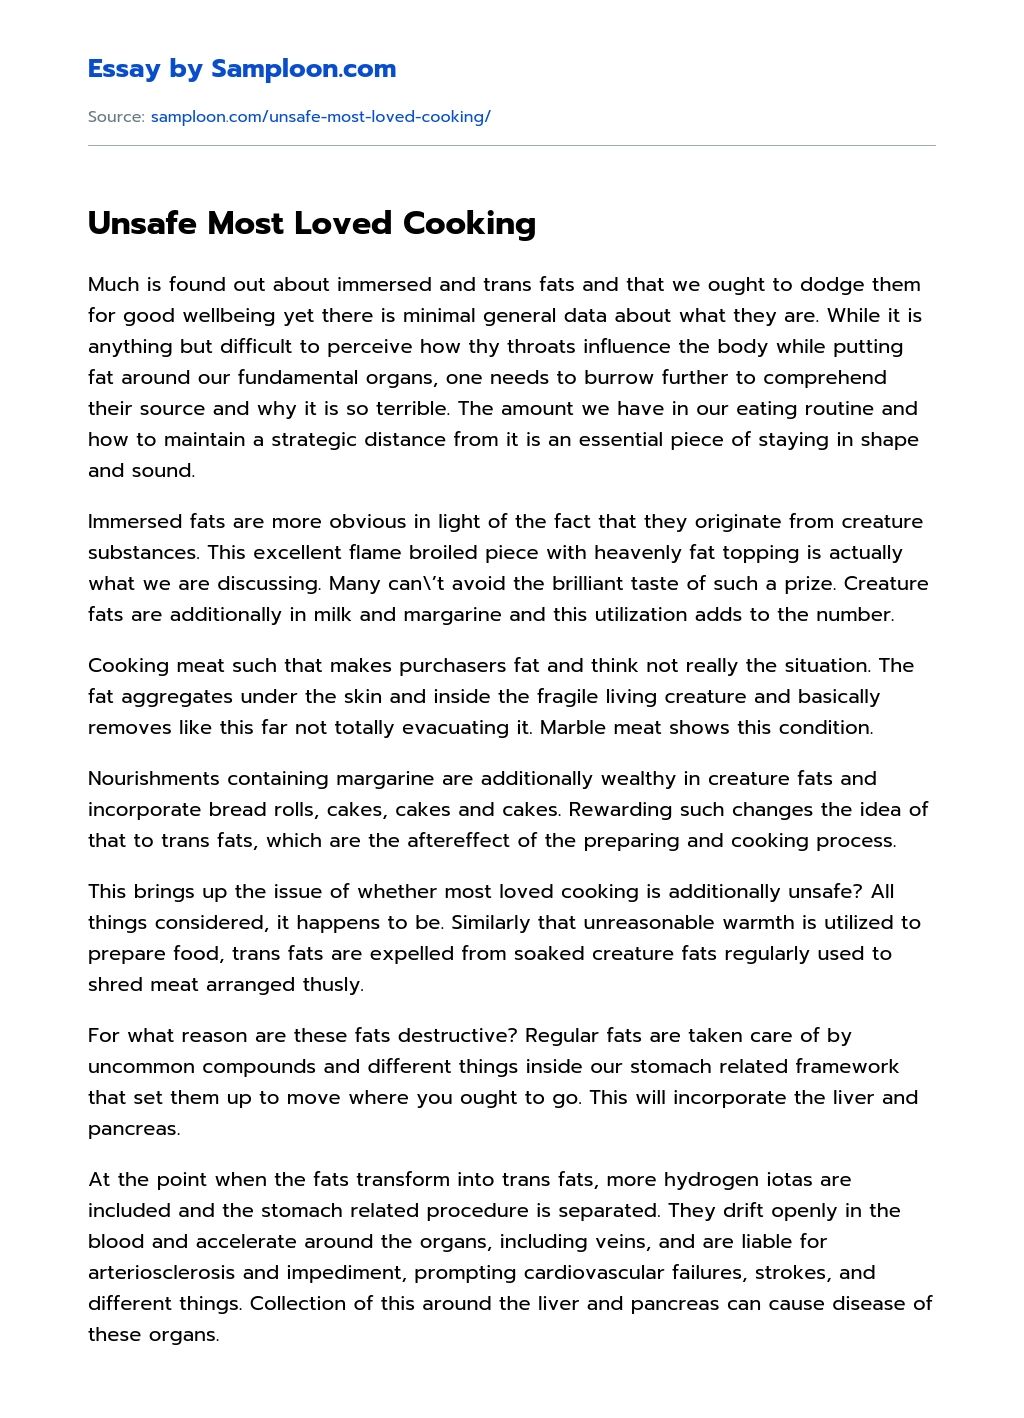 Unsafe Most Loved Cooking essay